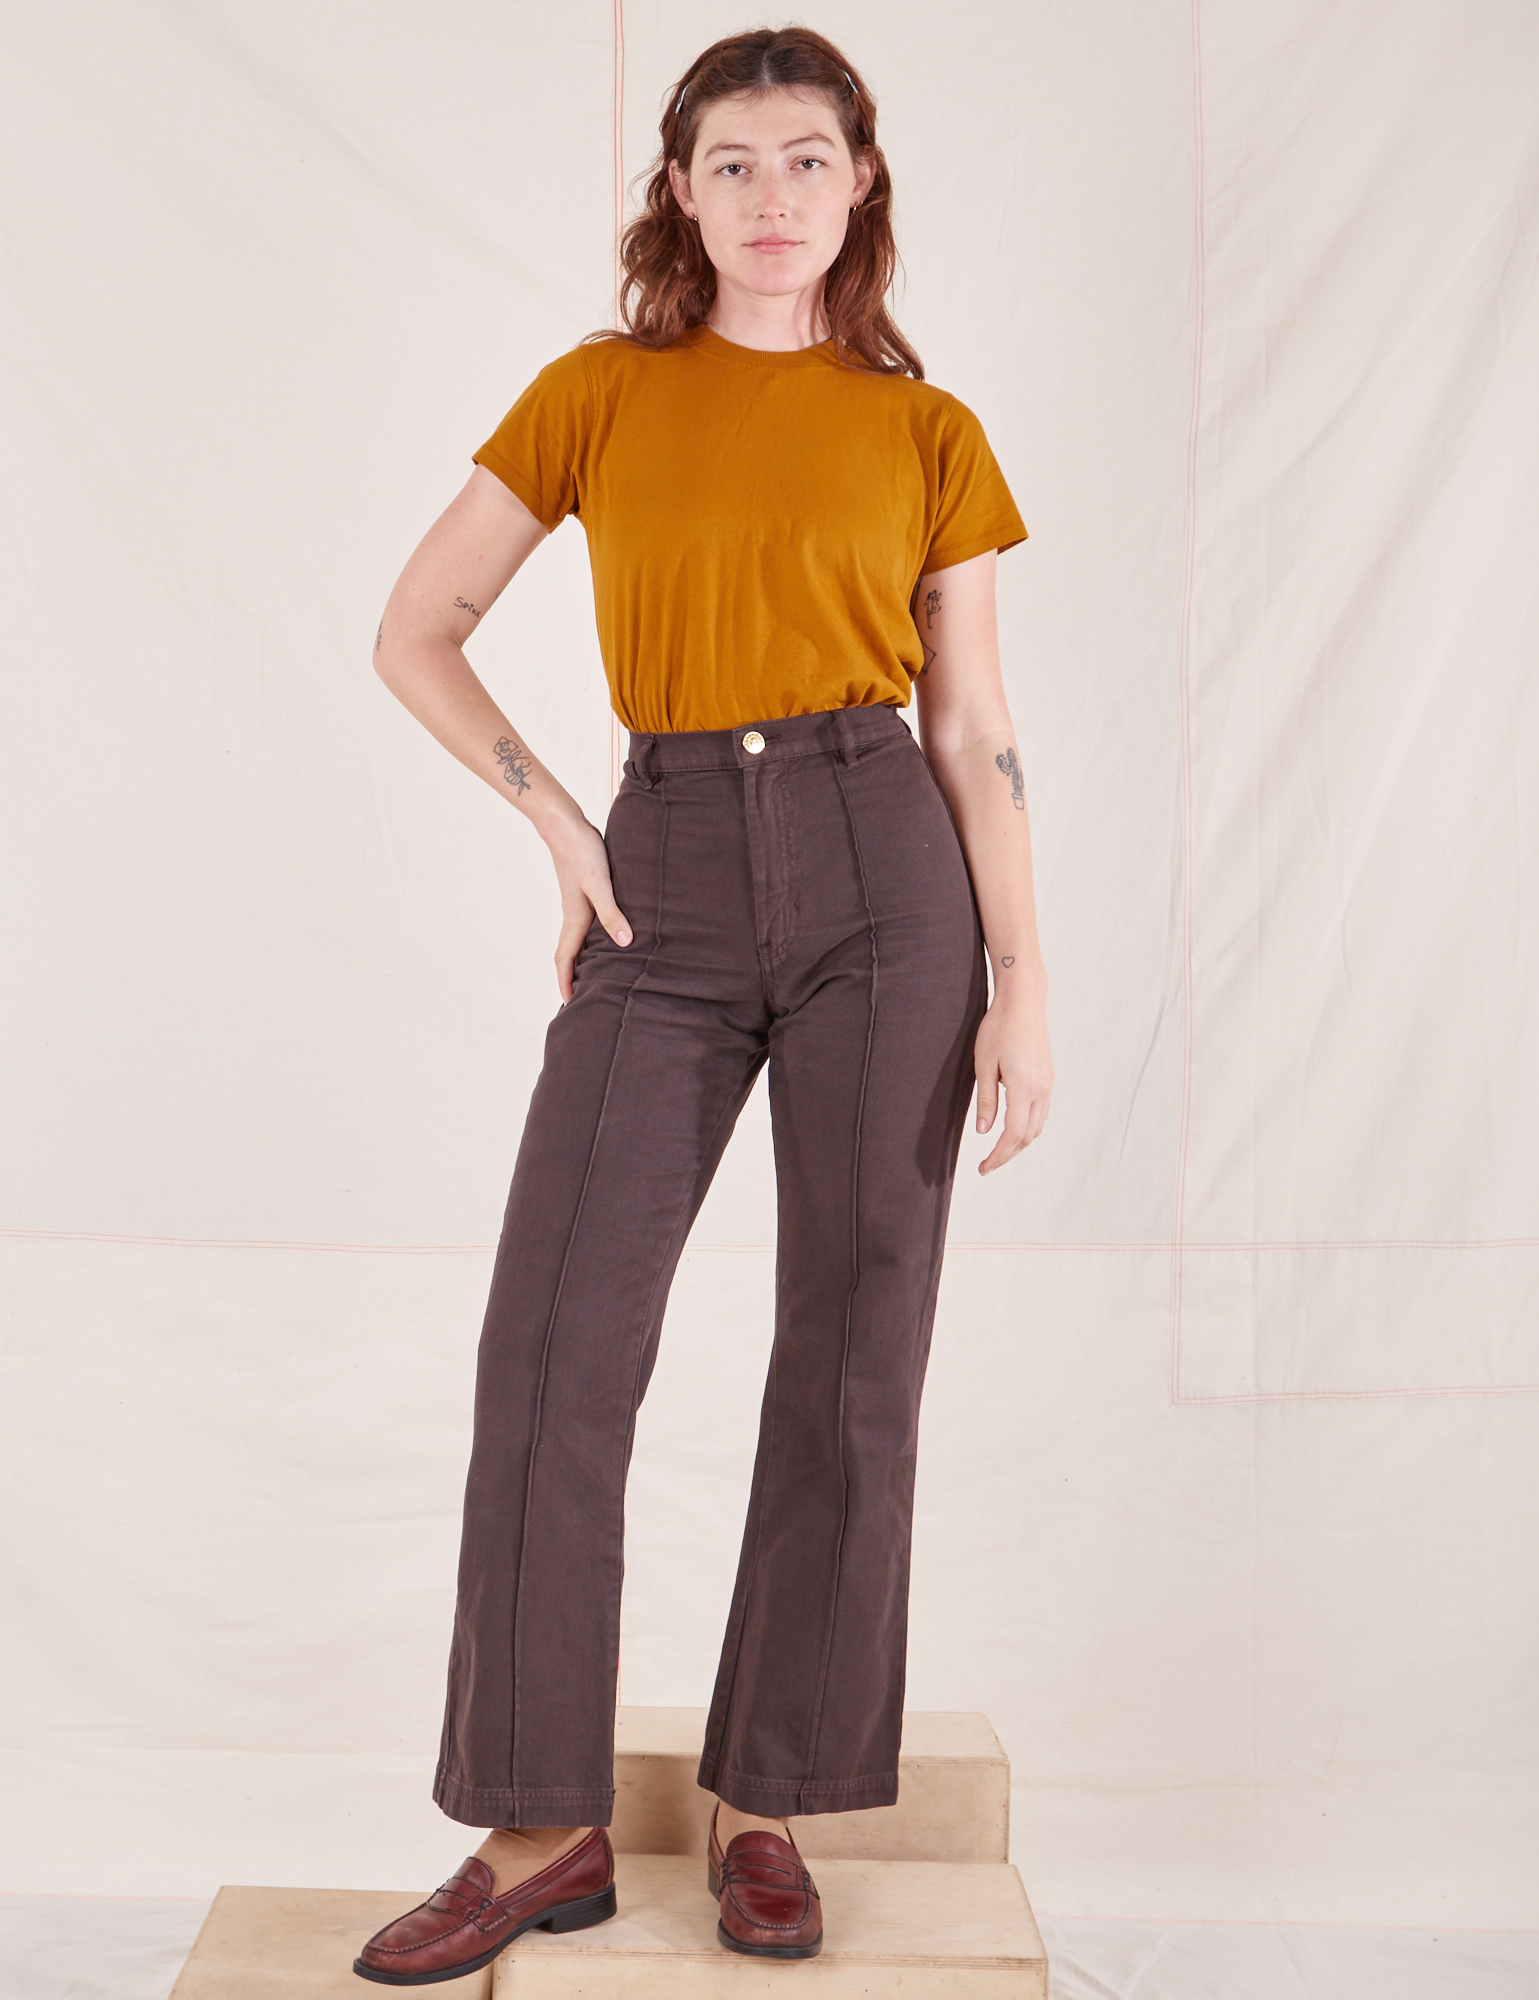 Alex is wearing P Organic Vintage Tee in Spicy Mustard paired with espresso brown Western Pants